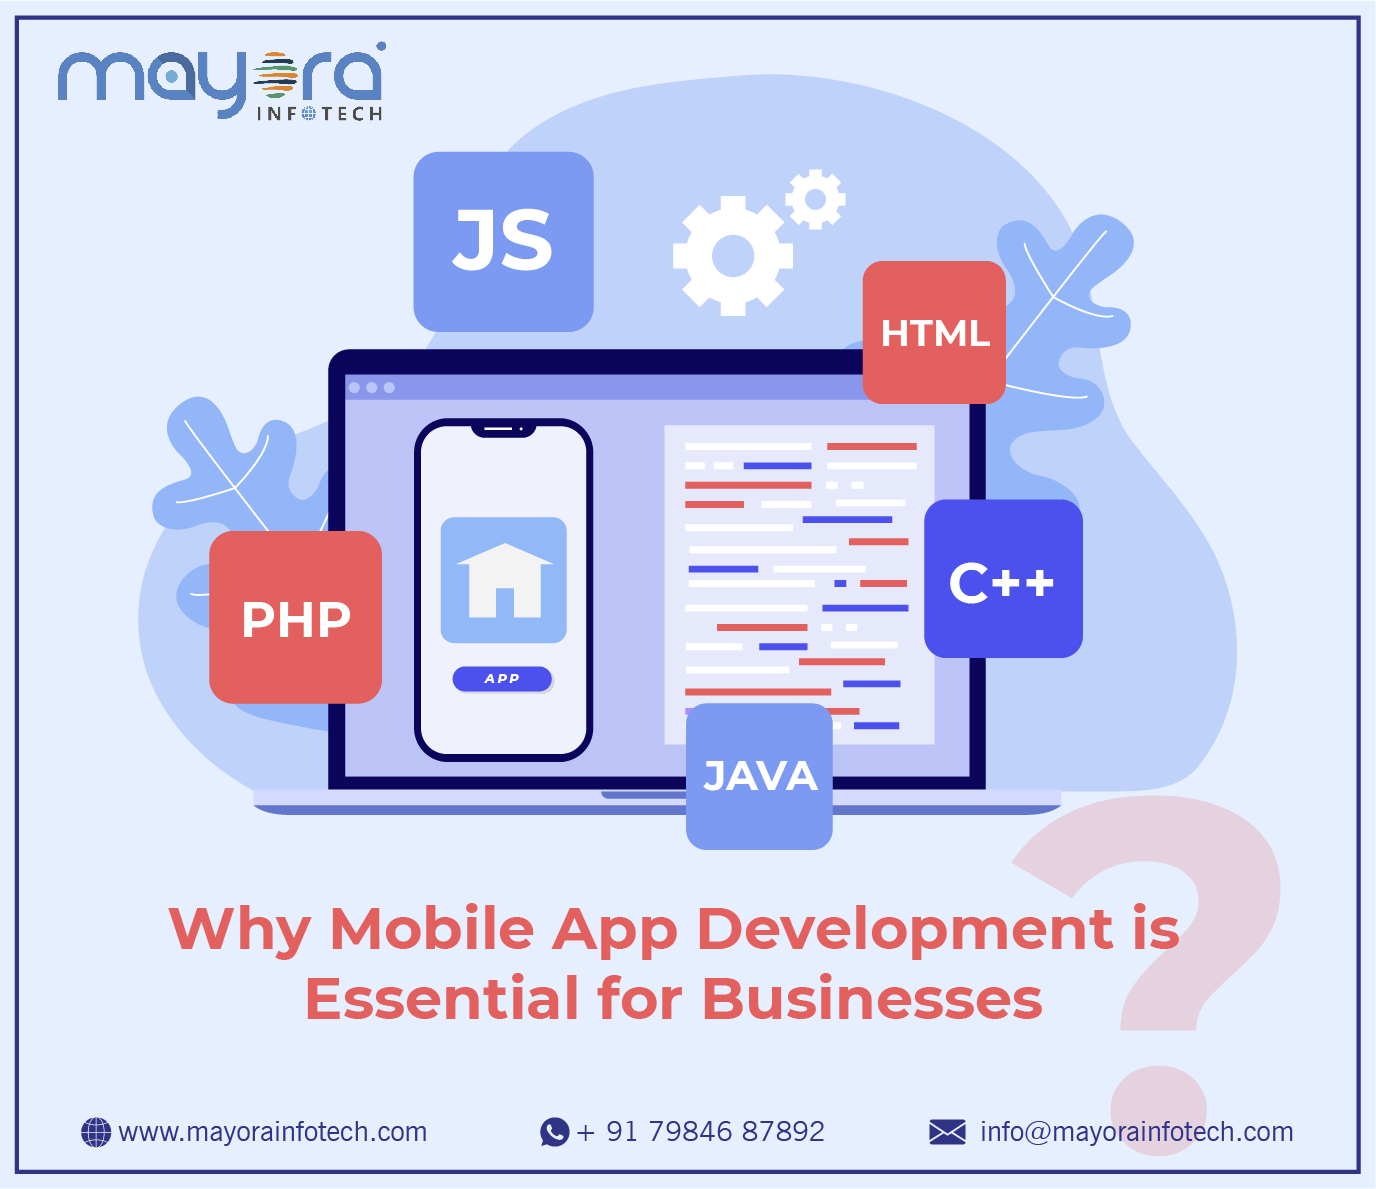 Why Mobile App Development is Essential for Businesses